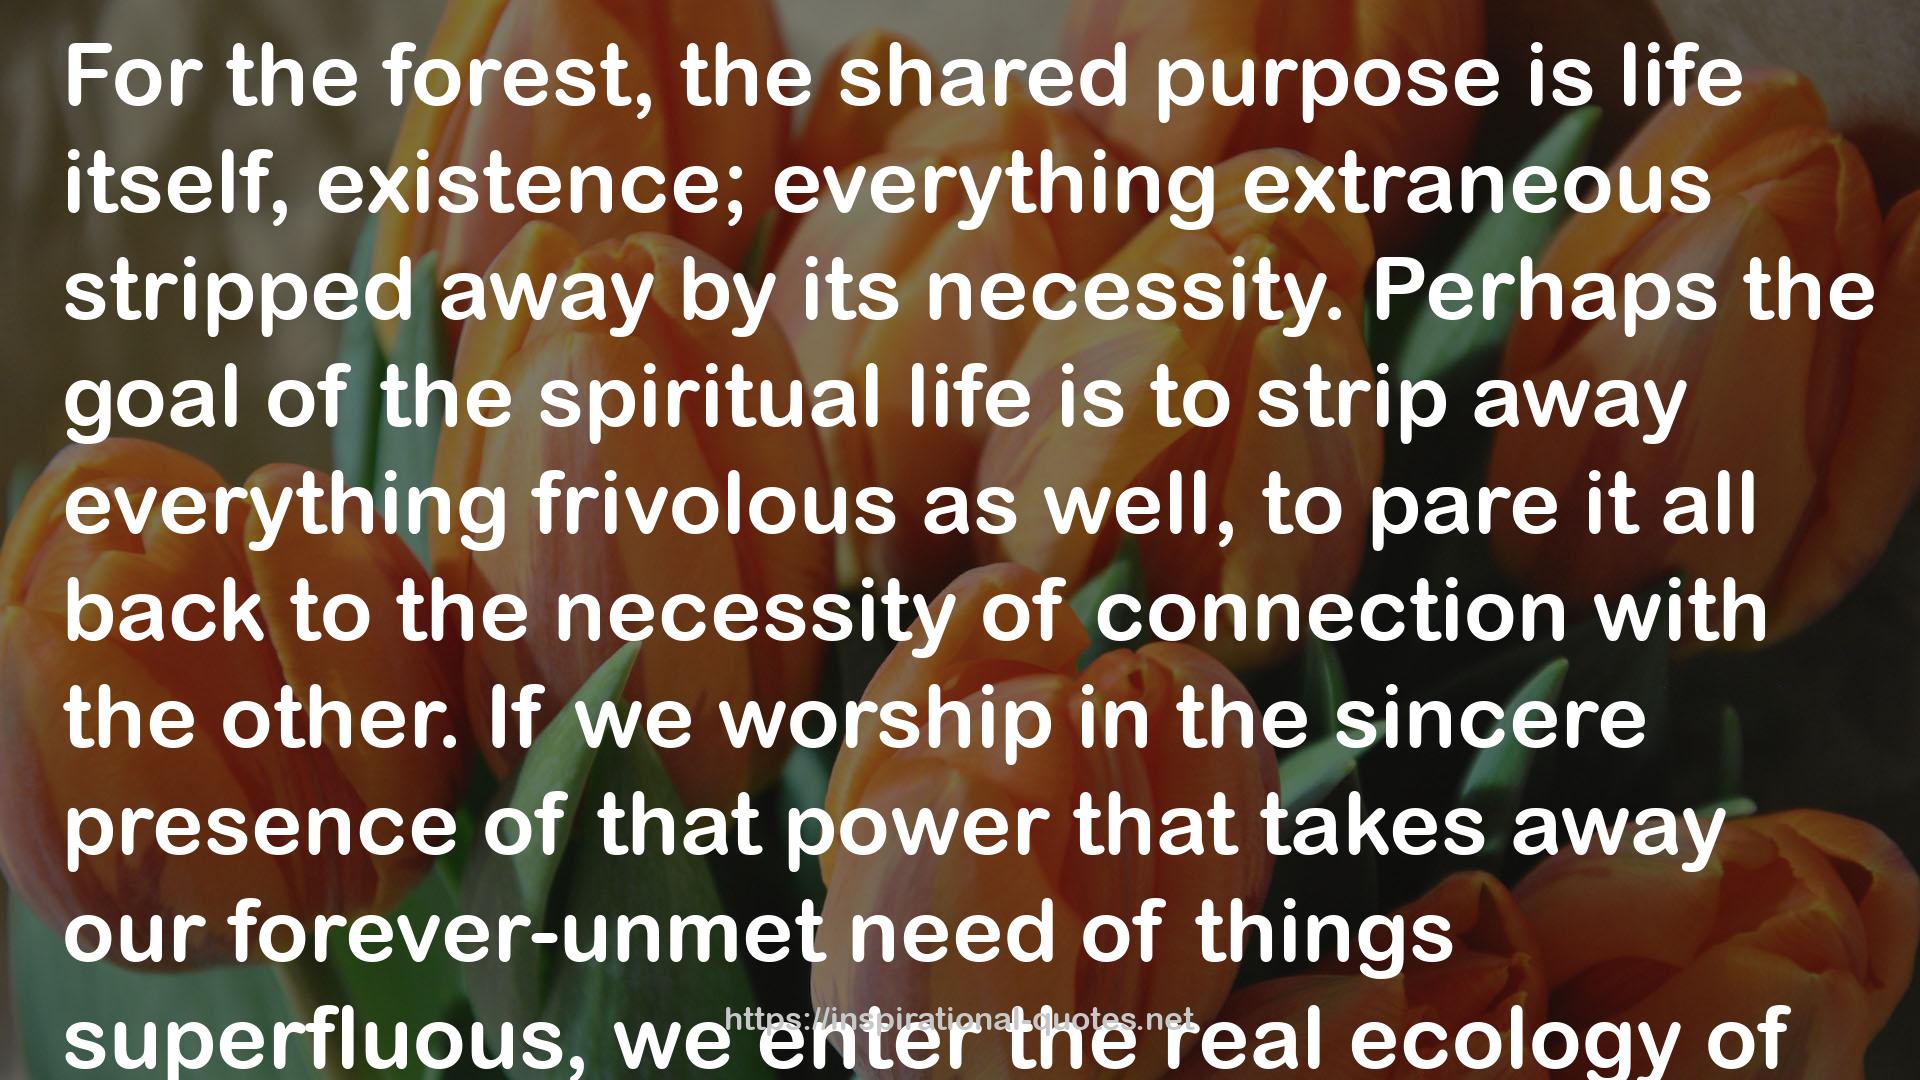 The Ecology of Quaker Meeting QUOTES